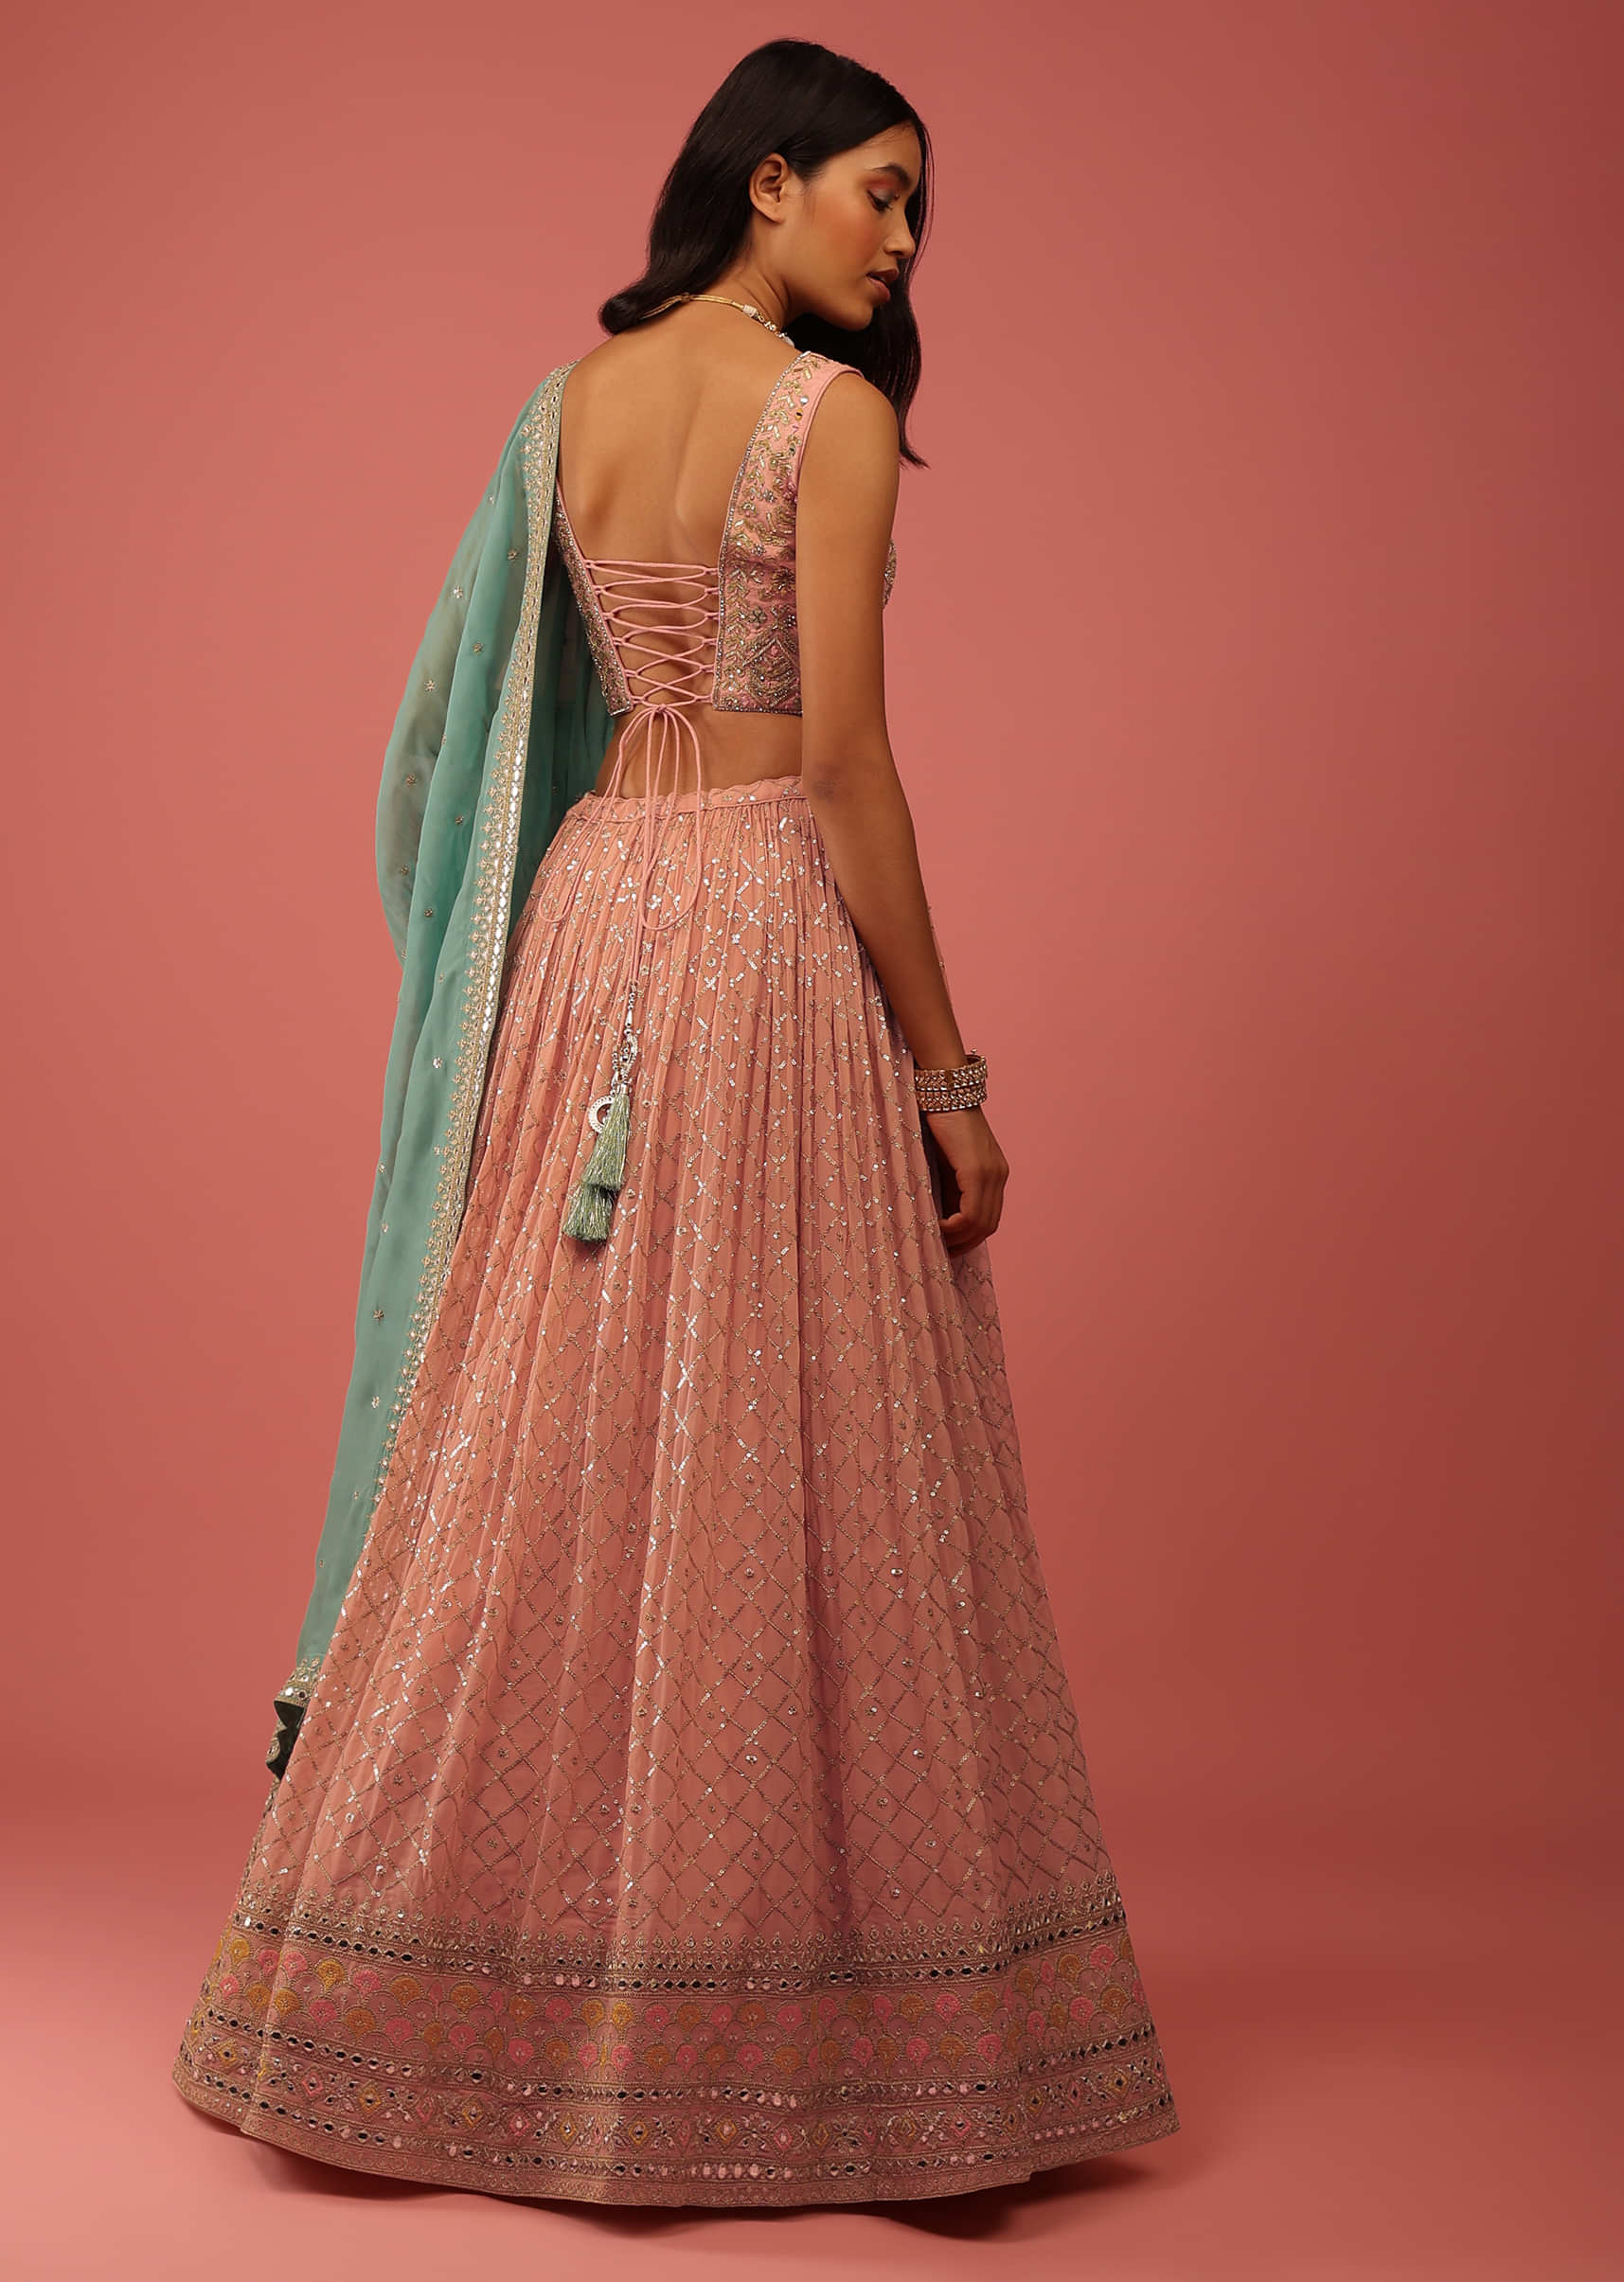 Rose Pink Lehenga Choli With multicolor Resham Border And Sequin Mesh Jaal